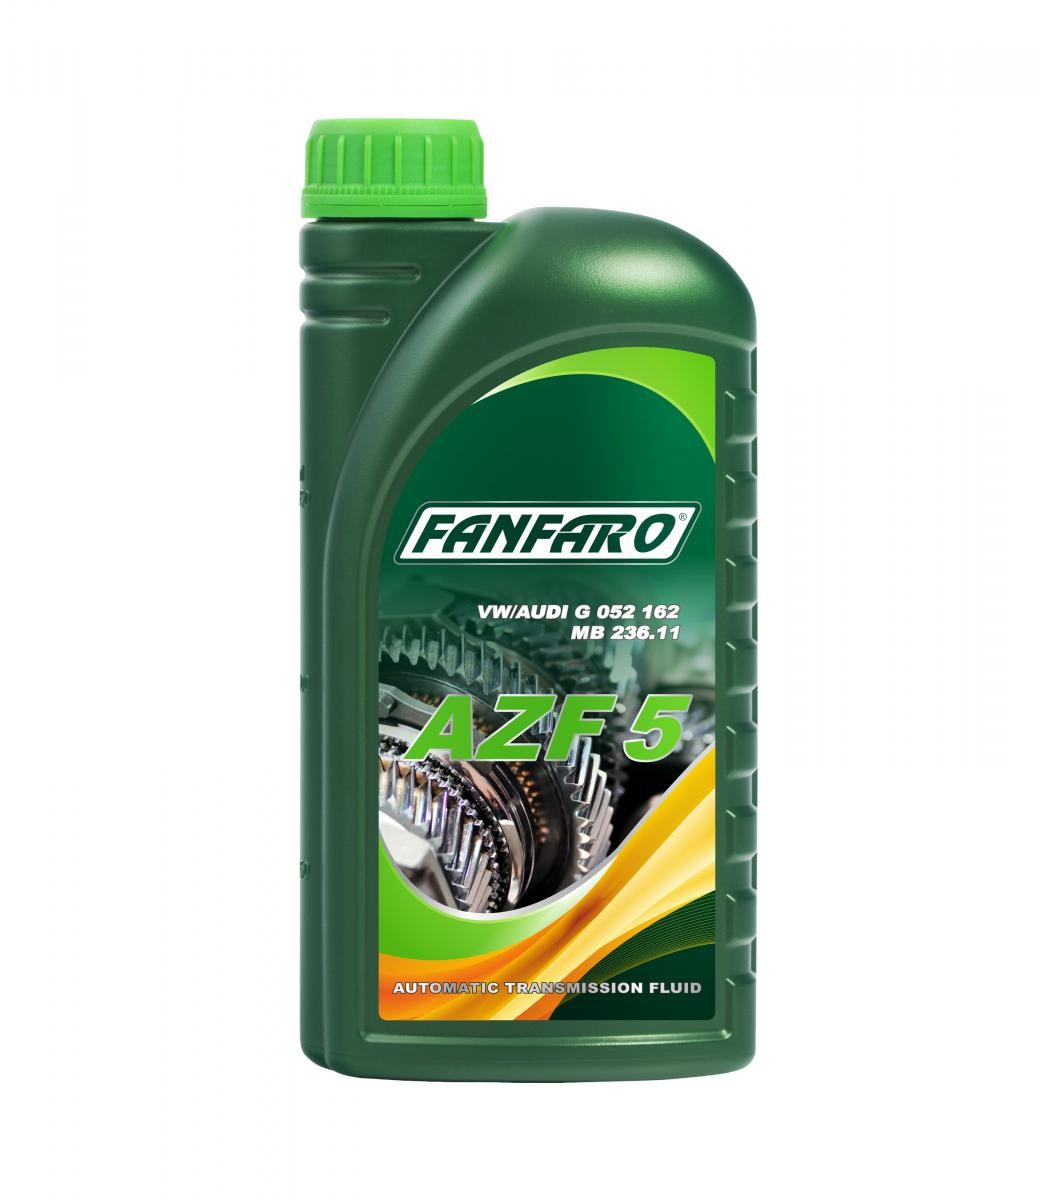 Original FF8612-1 FANFARO Gearbox oil and transmission oil experience and price